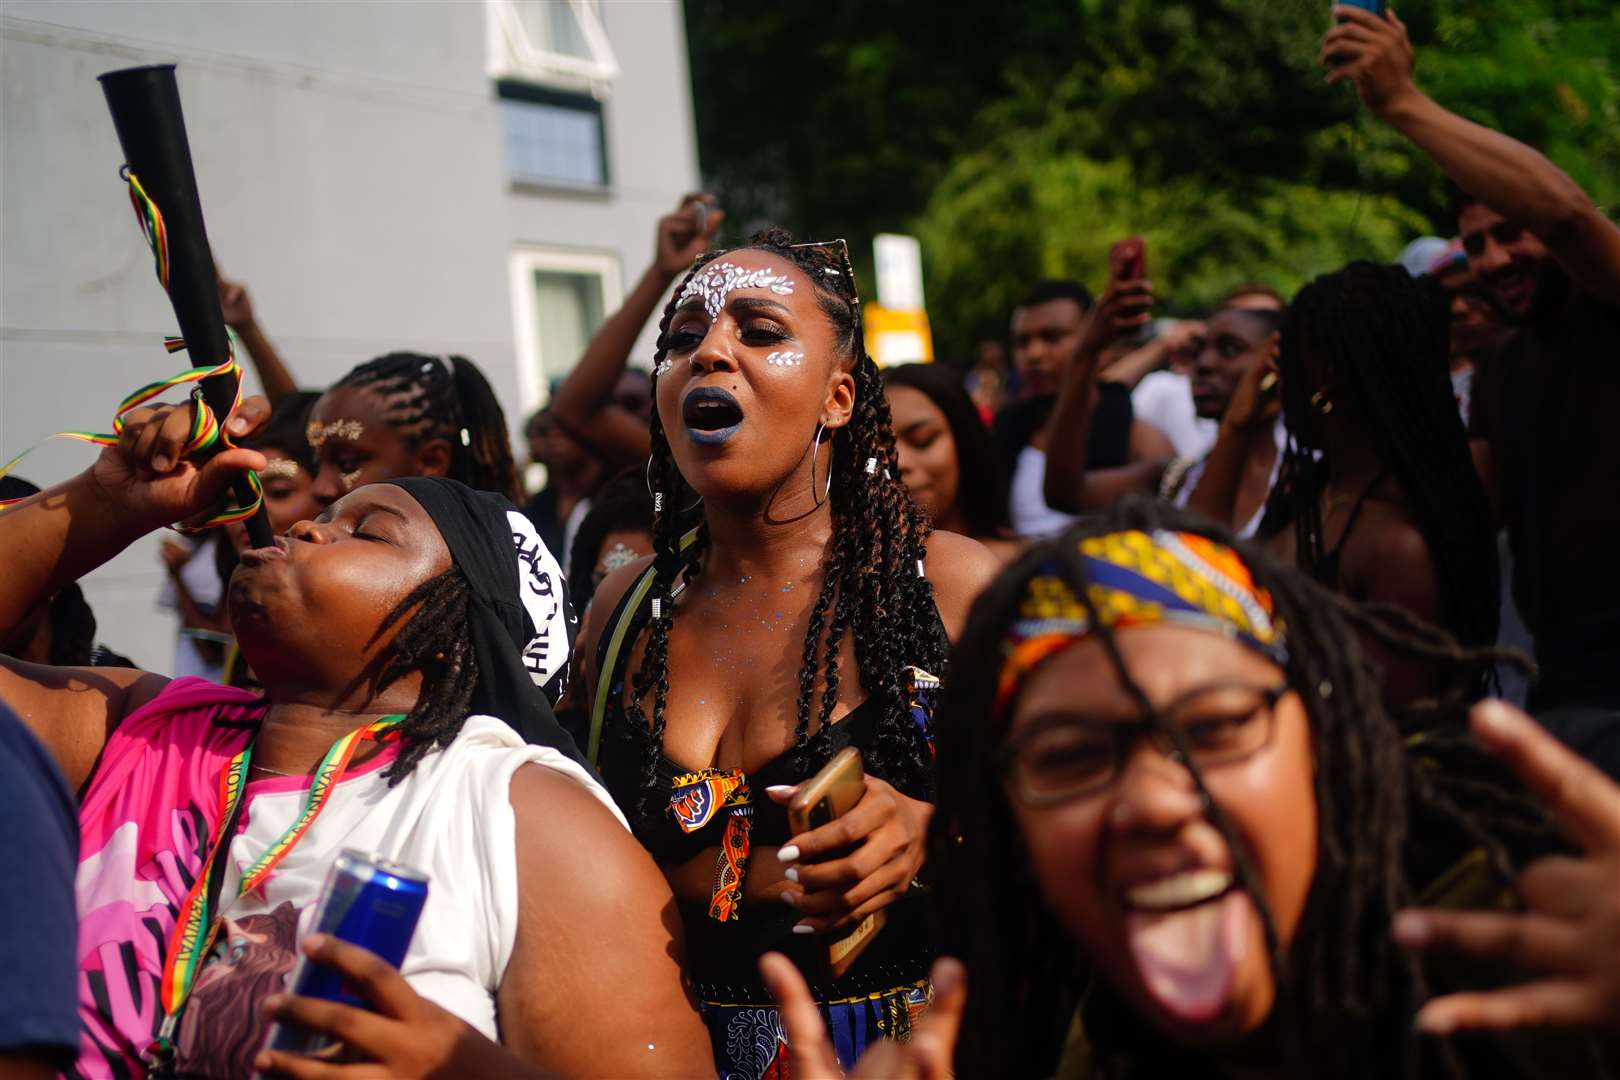 The carnival draws large numbers of revellers to celebrate Caribbean culture, heritage, and history (Victoria Jones/PA)